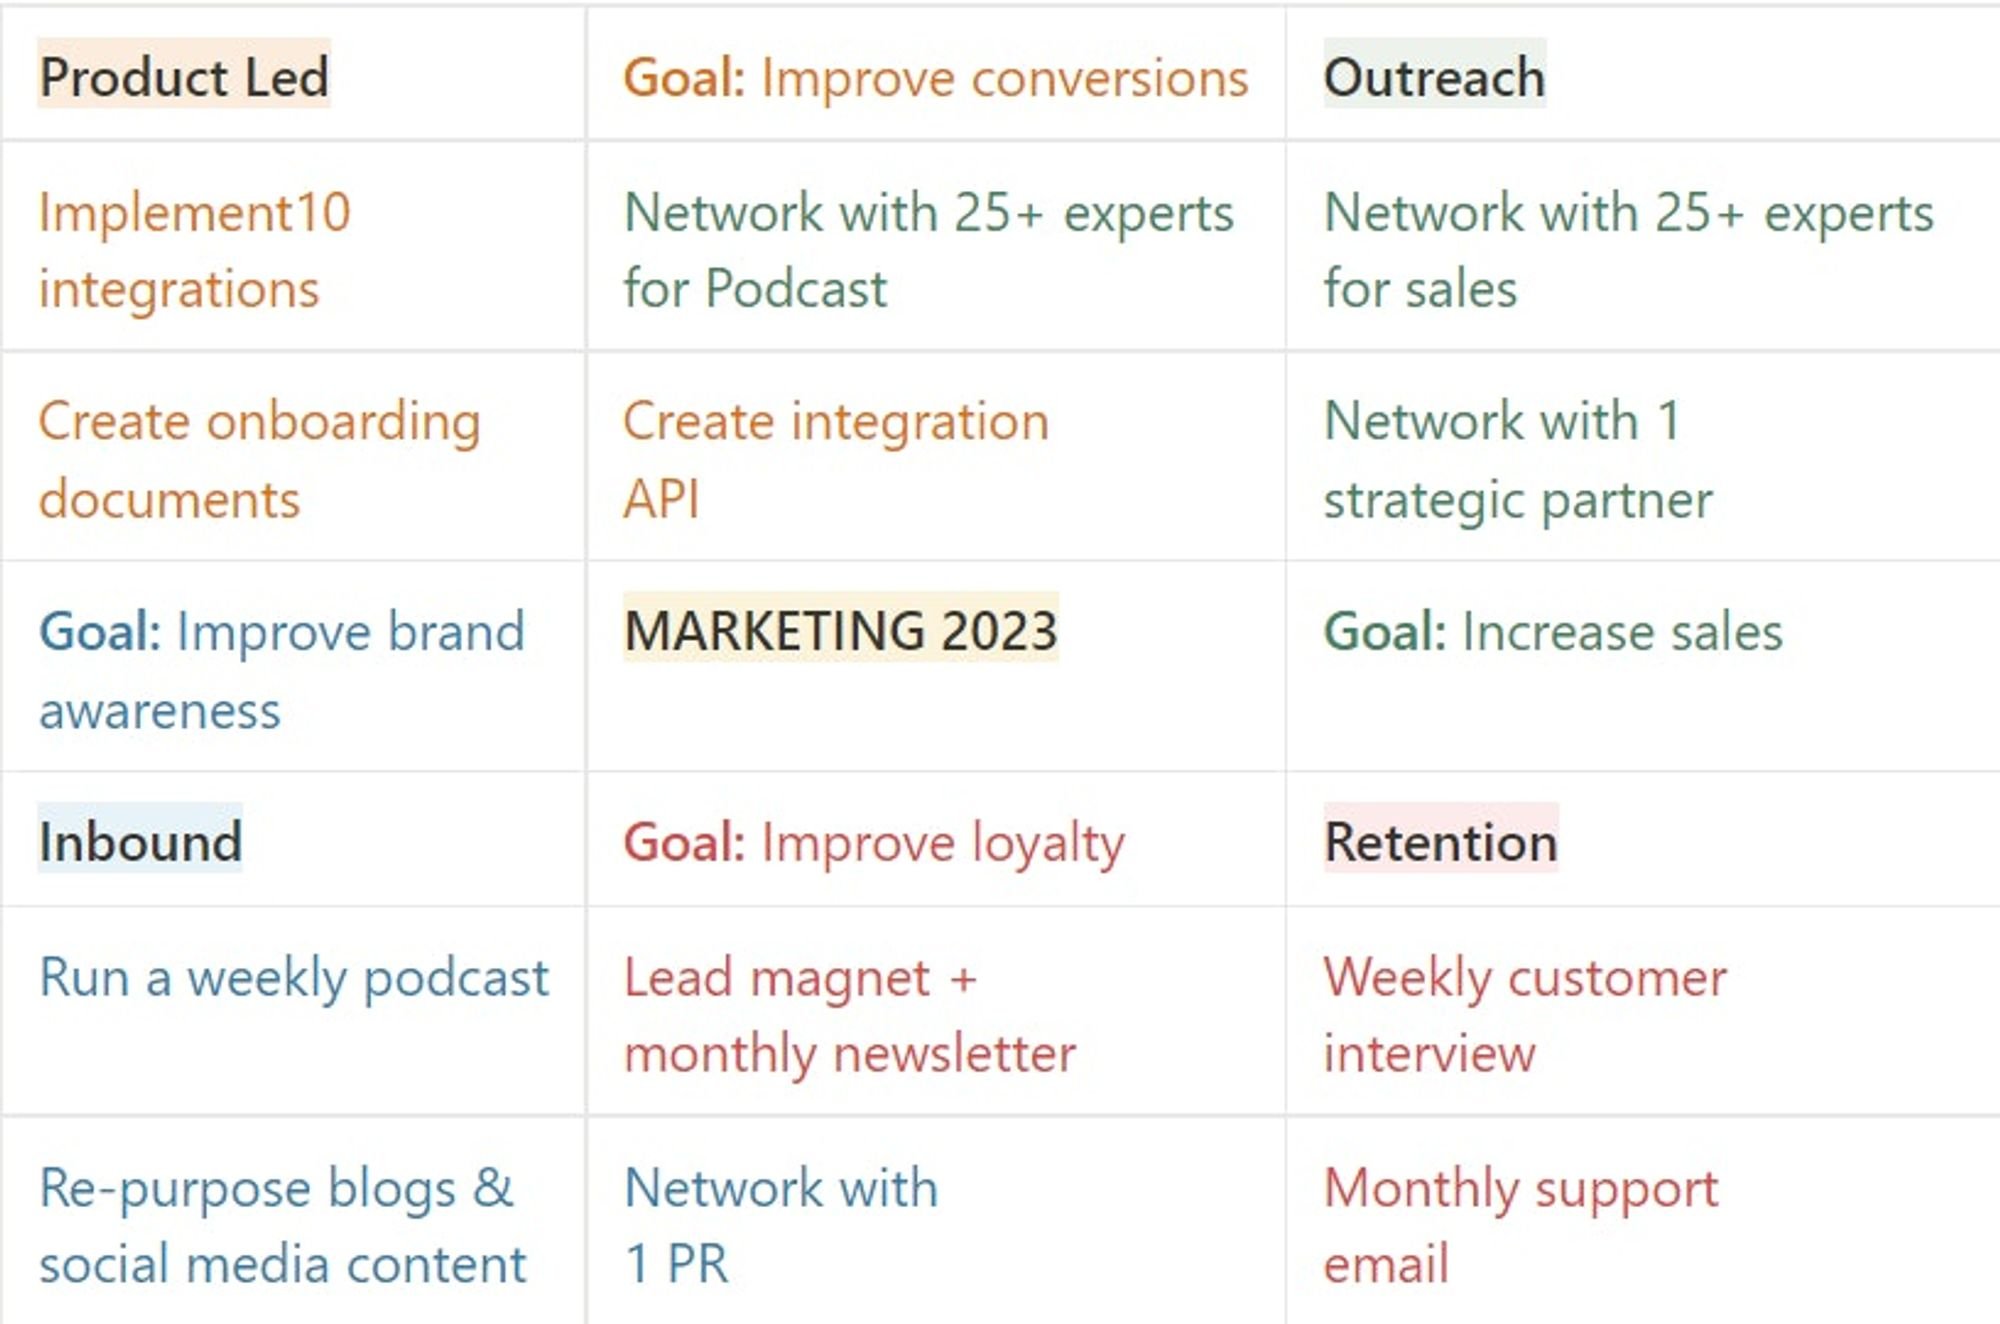 4-Channel SaaS Marketing Strategy: Retention systems